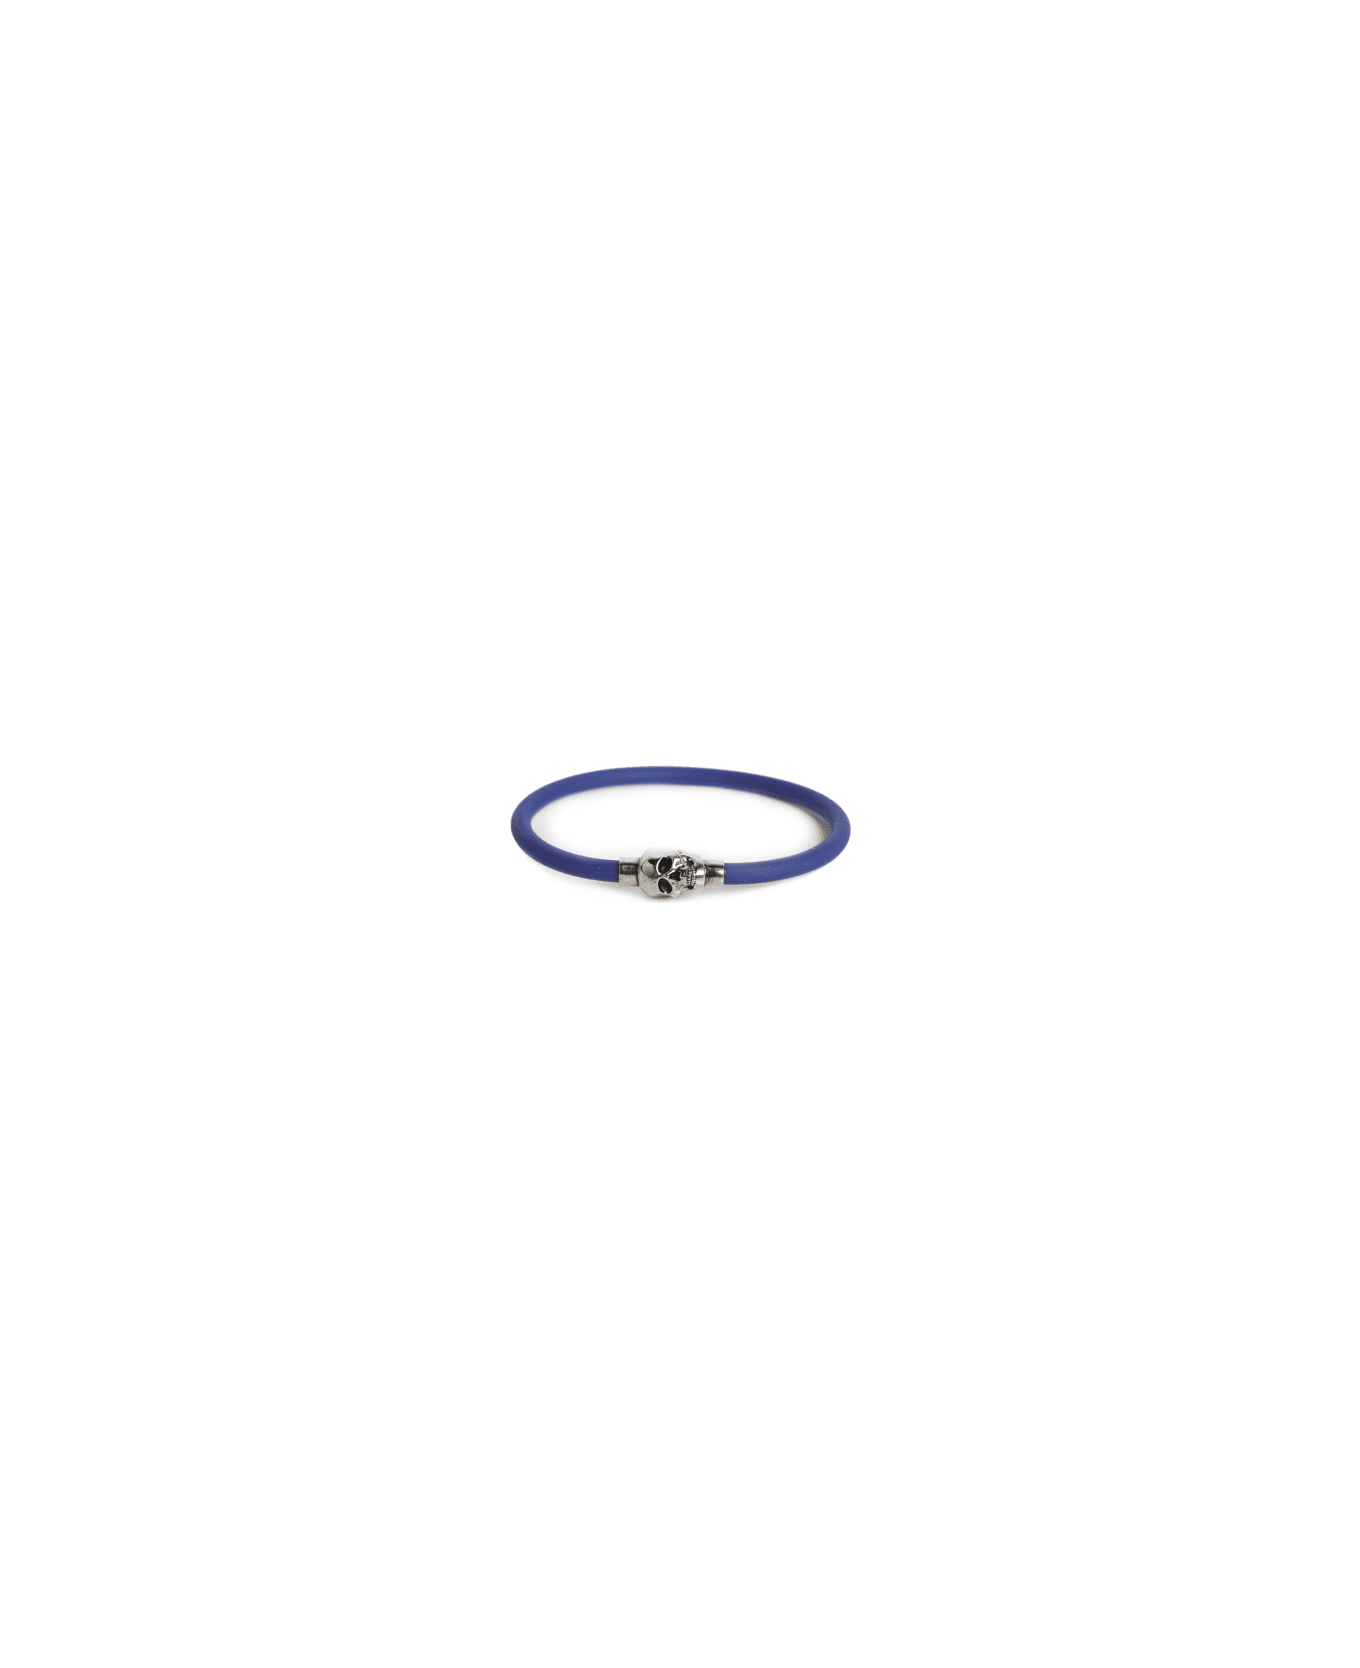 Alexander McQueen Rubber Skull Bracelet - Electric blue/a.sil ブレスレット